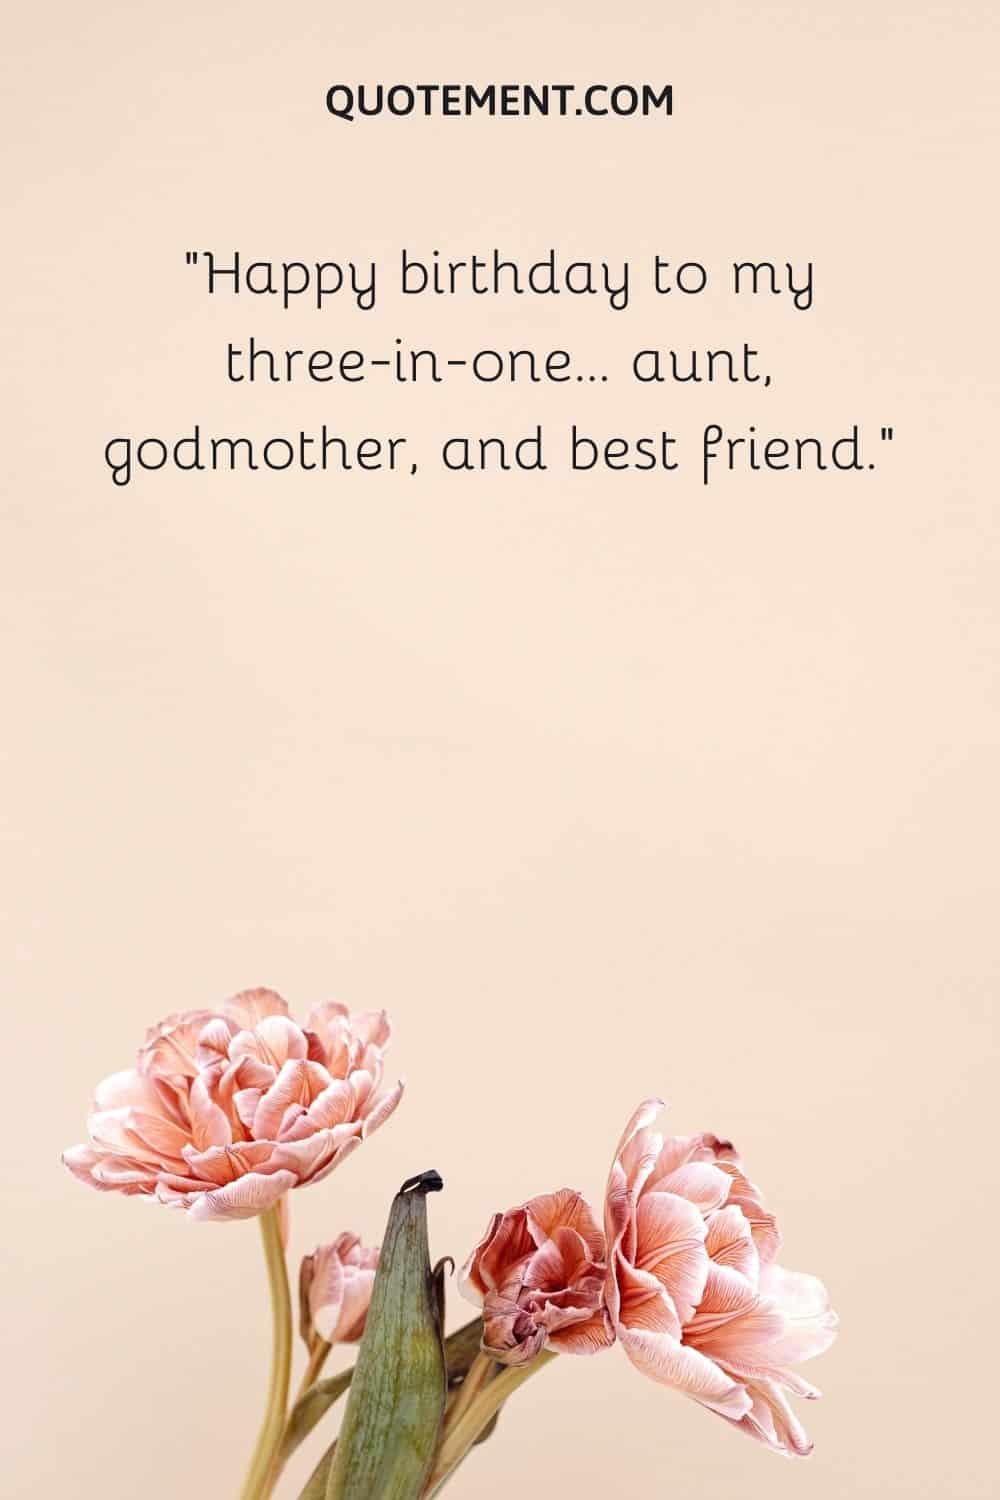 Happy birthday to my three-in-one… aunt, godmother, and best friend